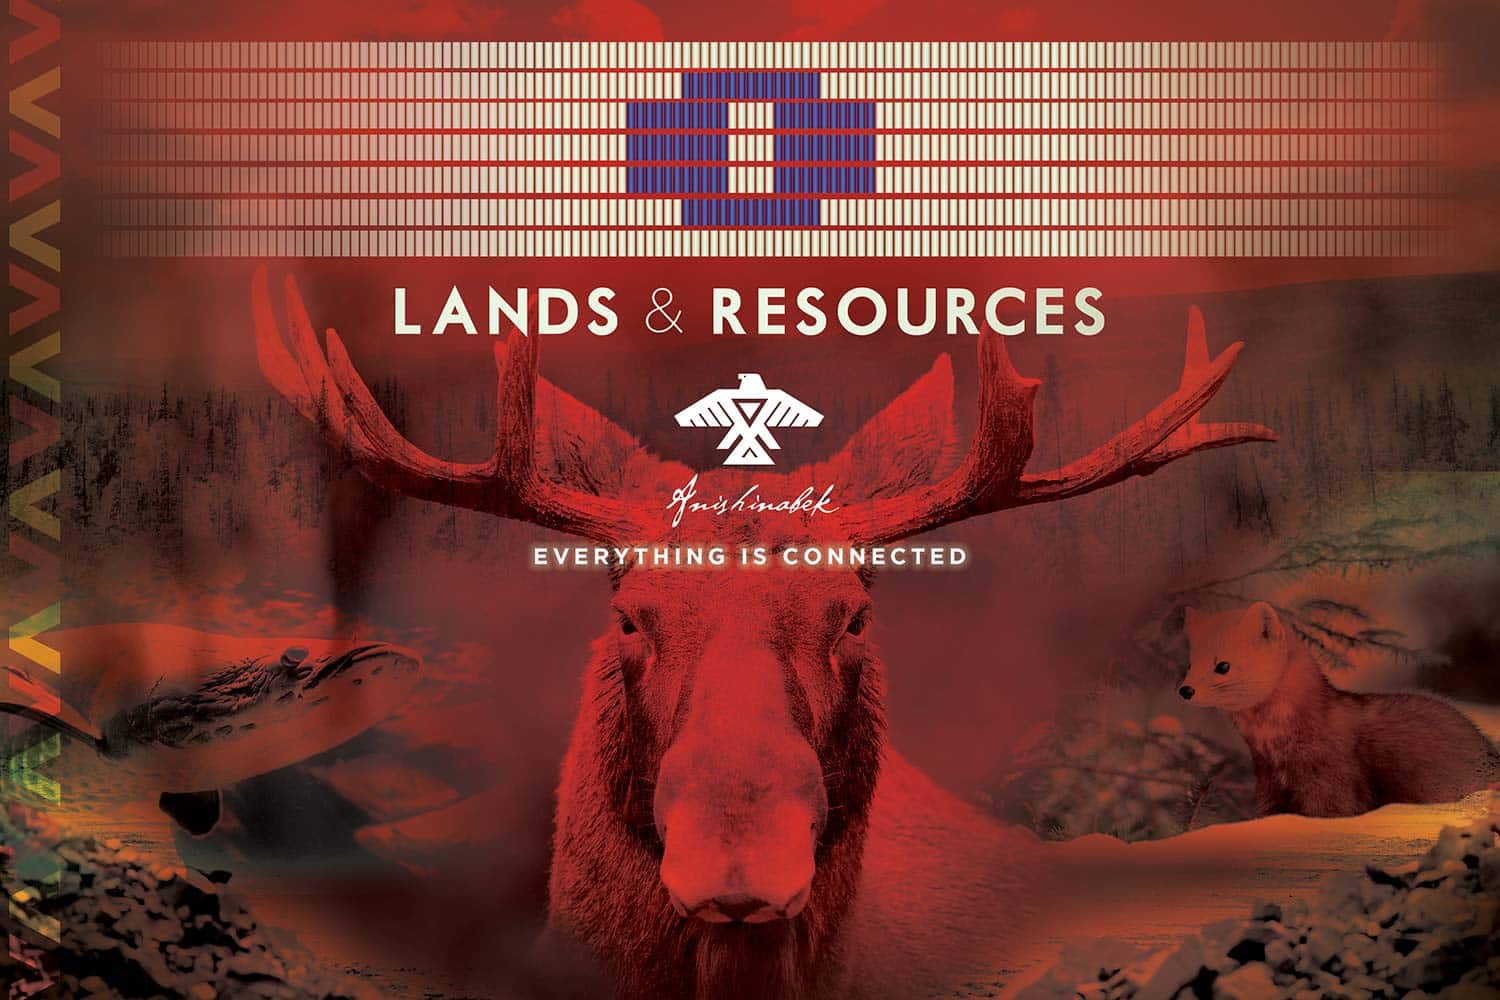 Union of Ontario Indians - Lands & Resources - Forum - Everything is Connected